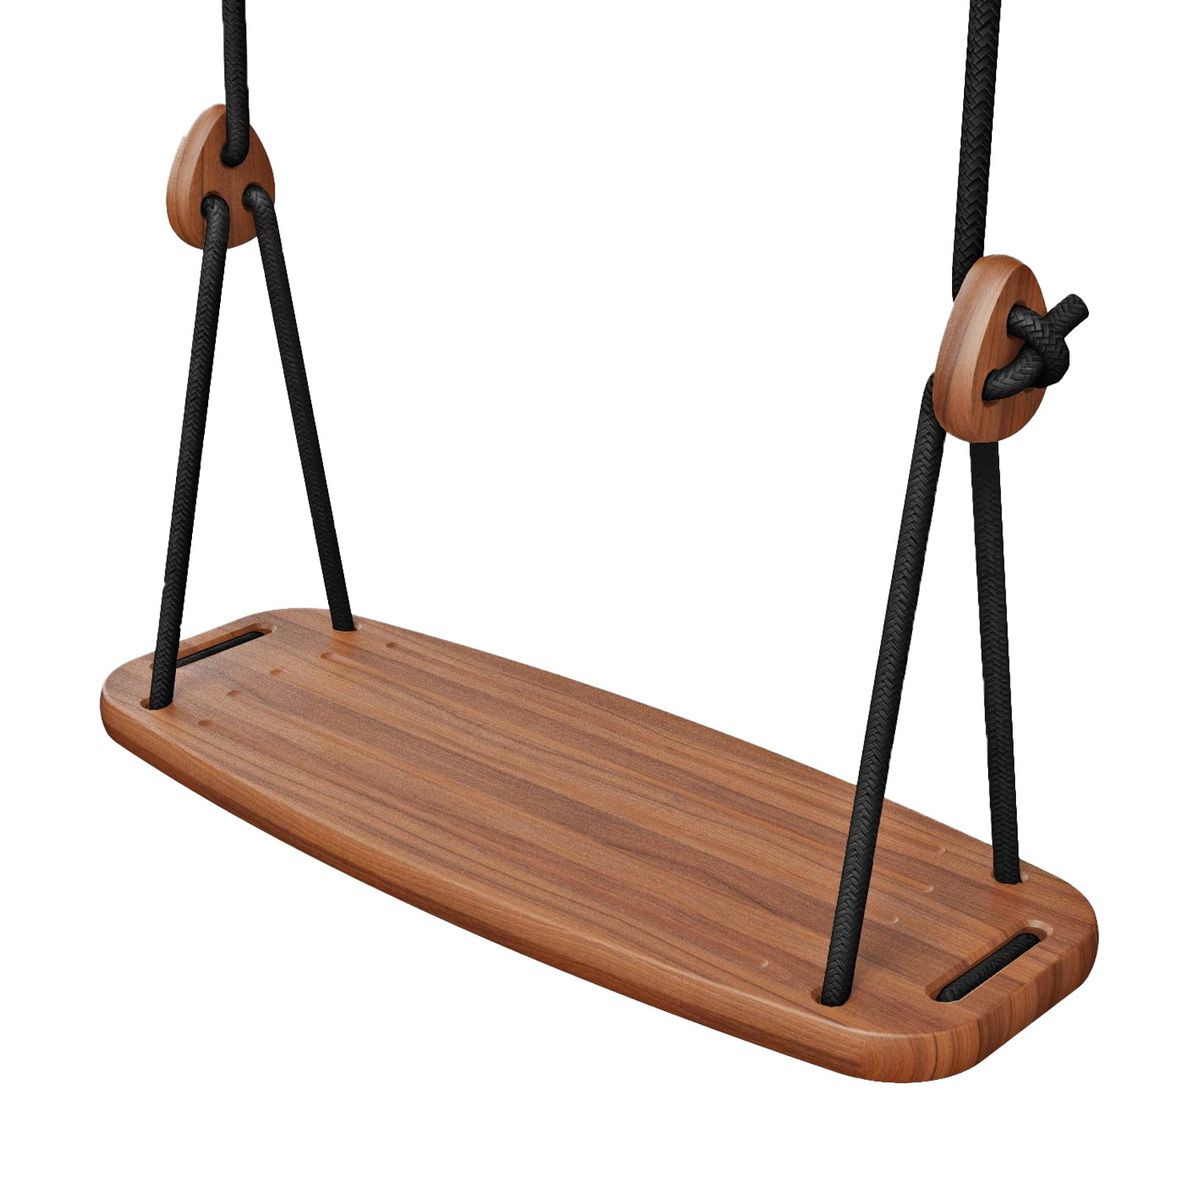 Widely Used Lillagunga Lillagunga Classic Outdoor Swing, Walnut – Black Inside 2 Person Black Wood Outdoor Swings (View 21 of 25)